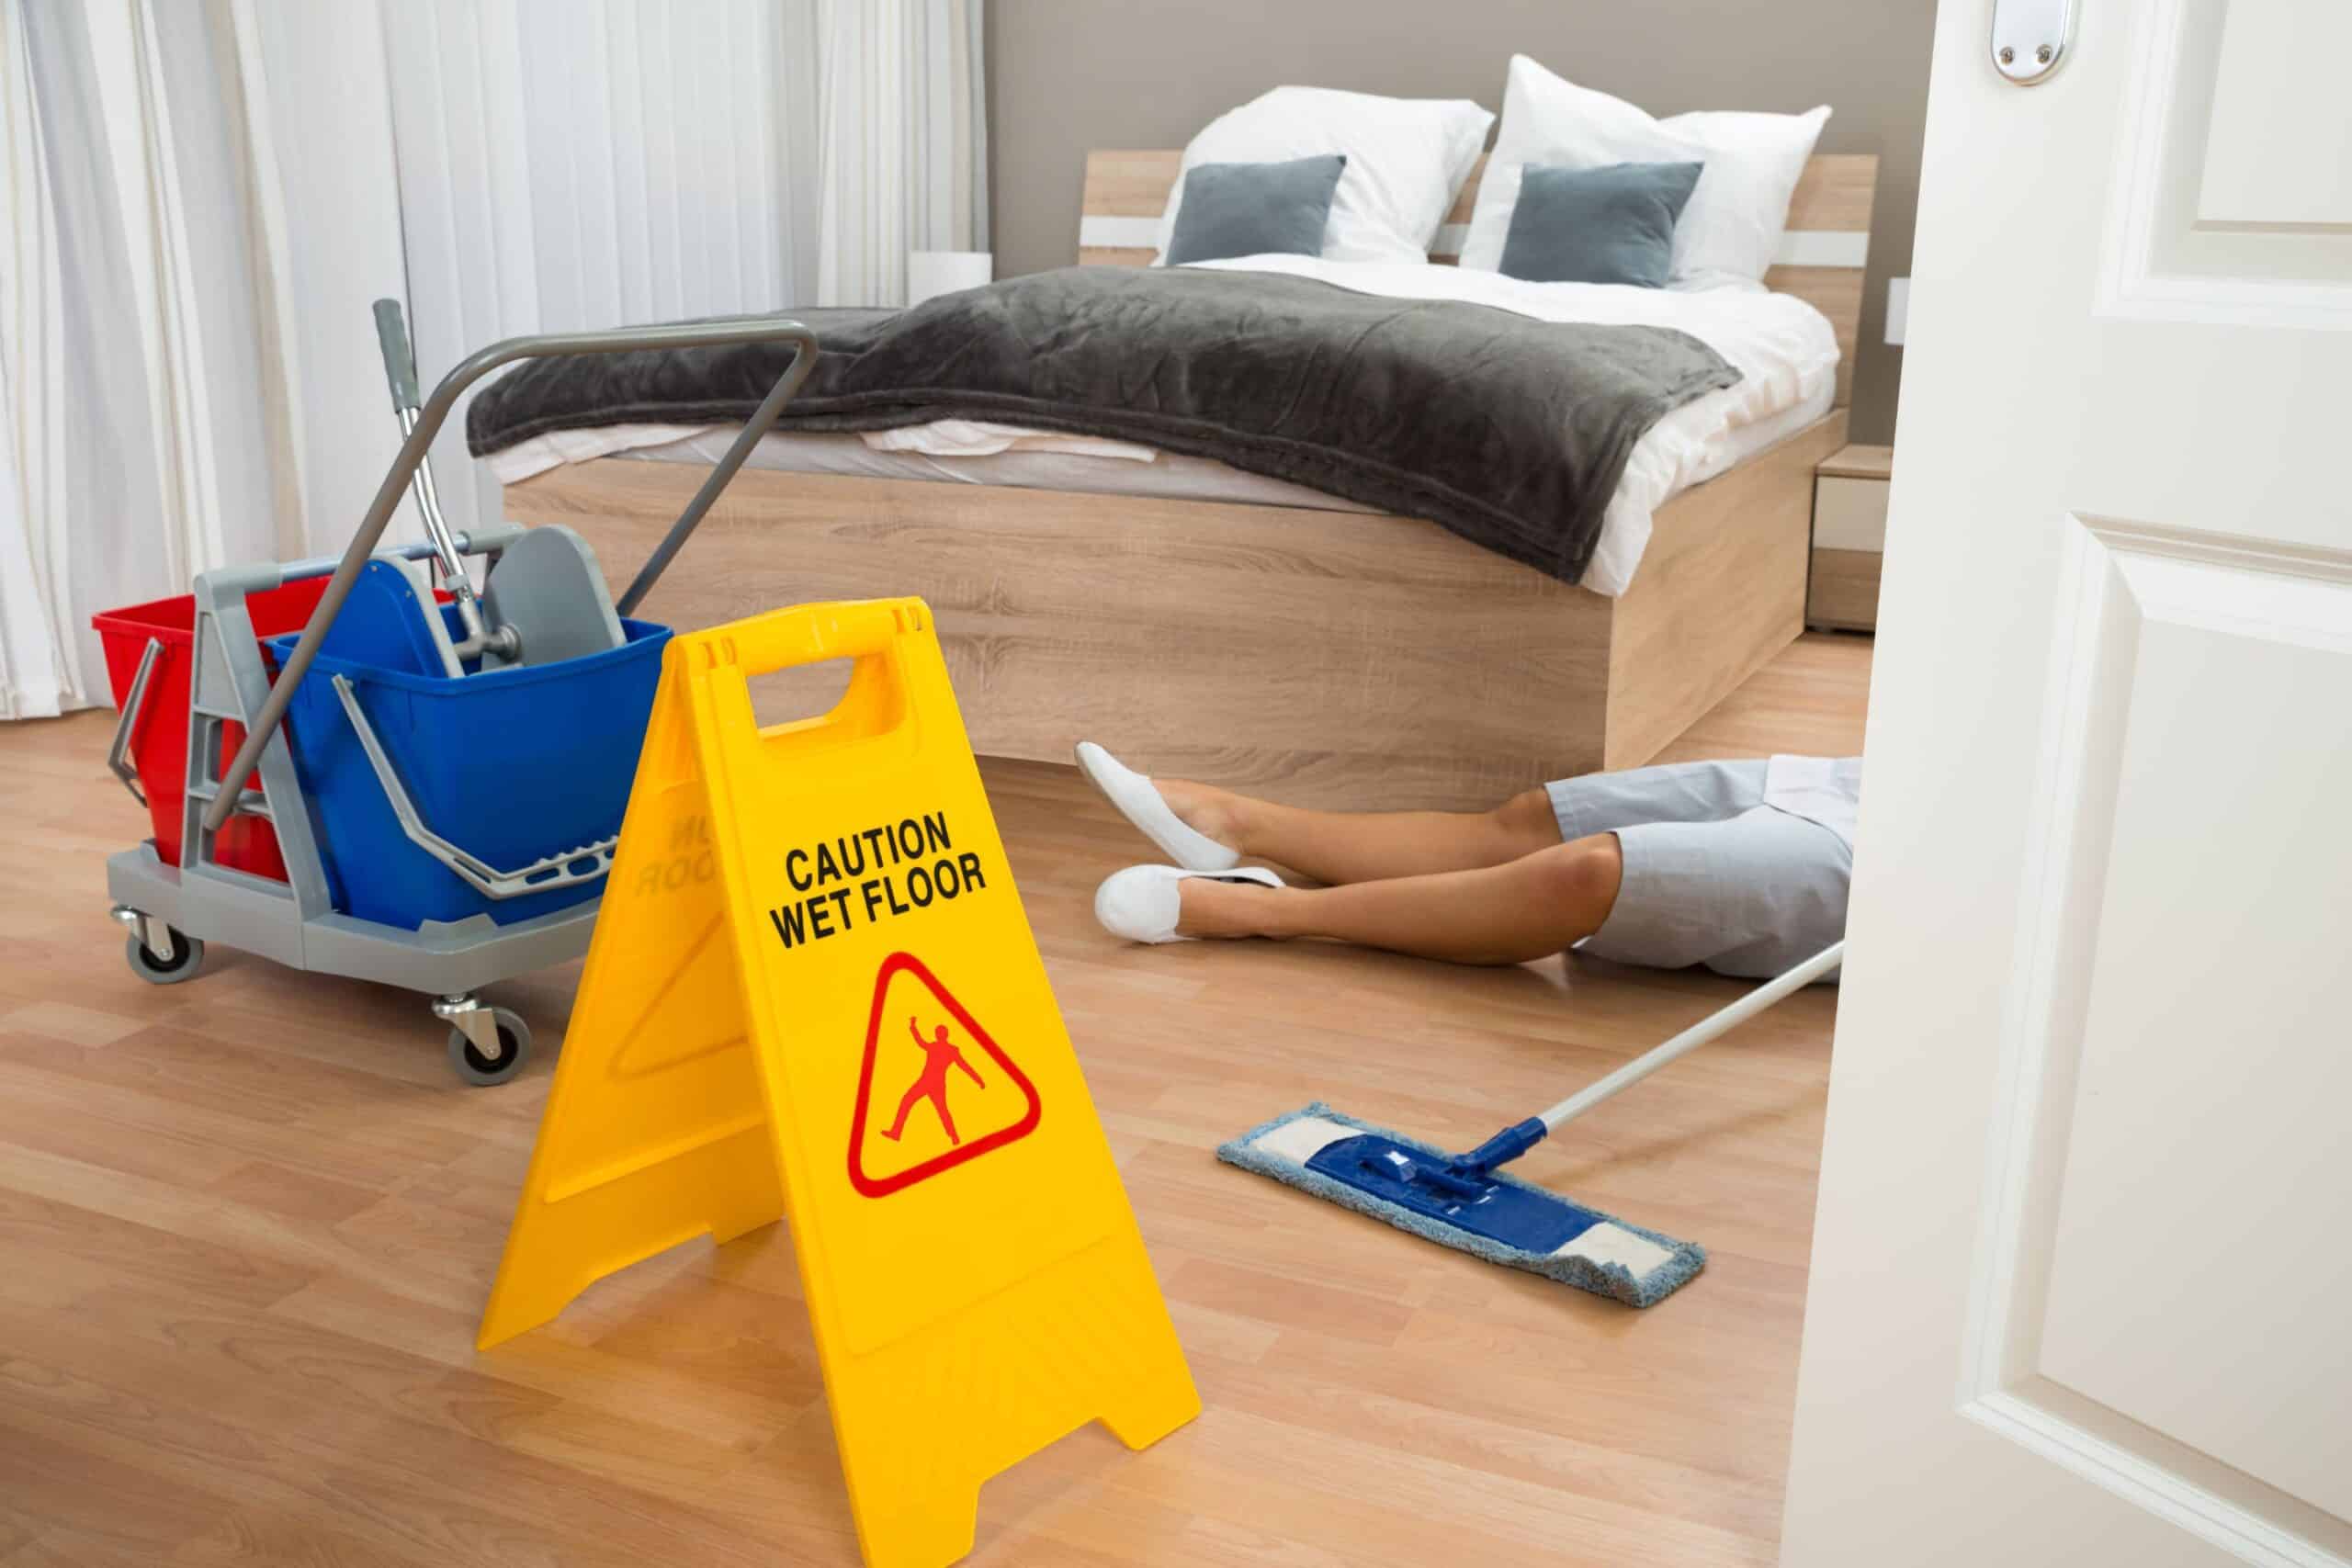 Hotel Accidents in FL: Holding Property Owners Accountable for Negligence